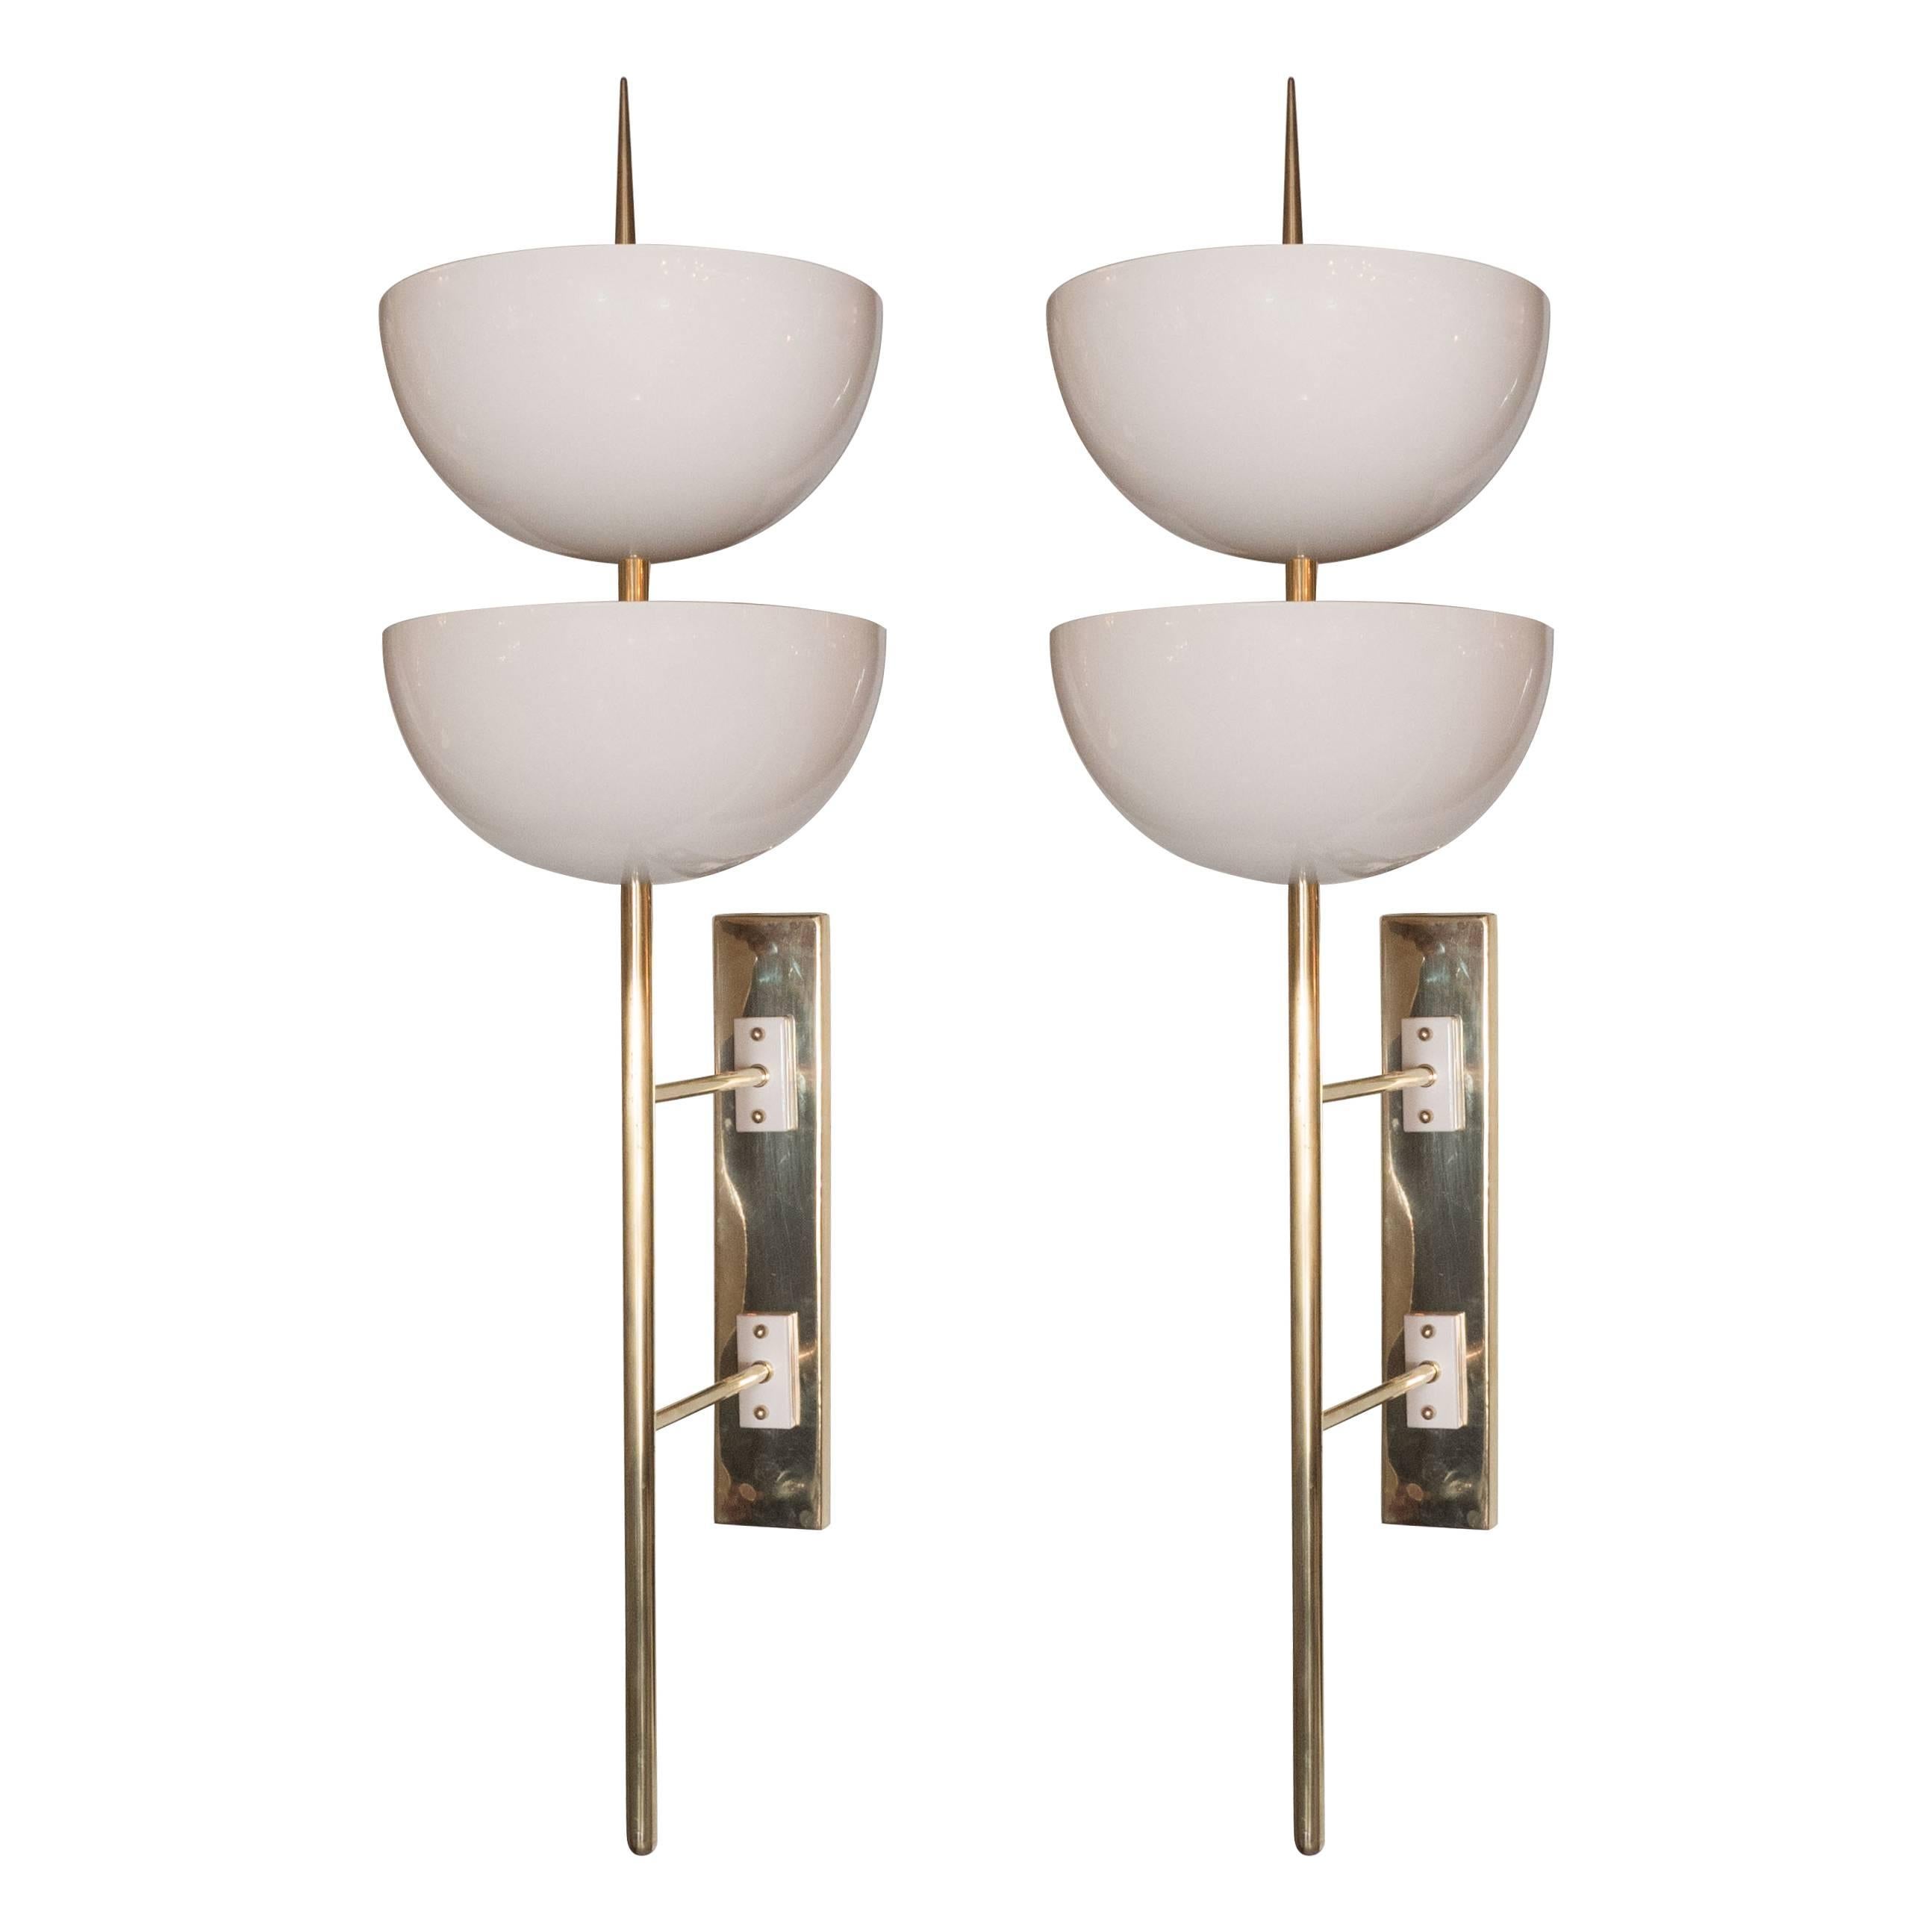 Pair of Monumental Reverse-Dome Trophy Sconces in White Enamel and Brass